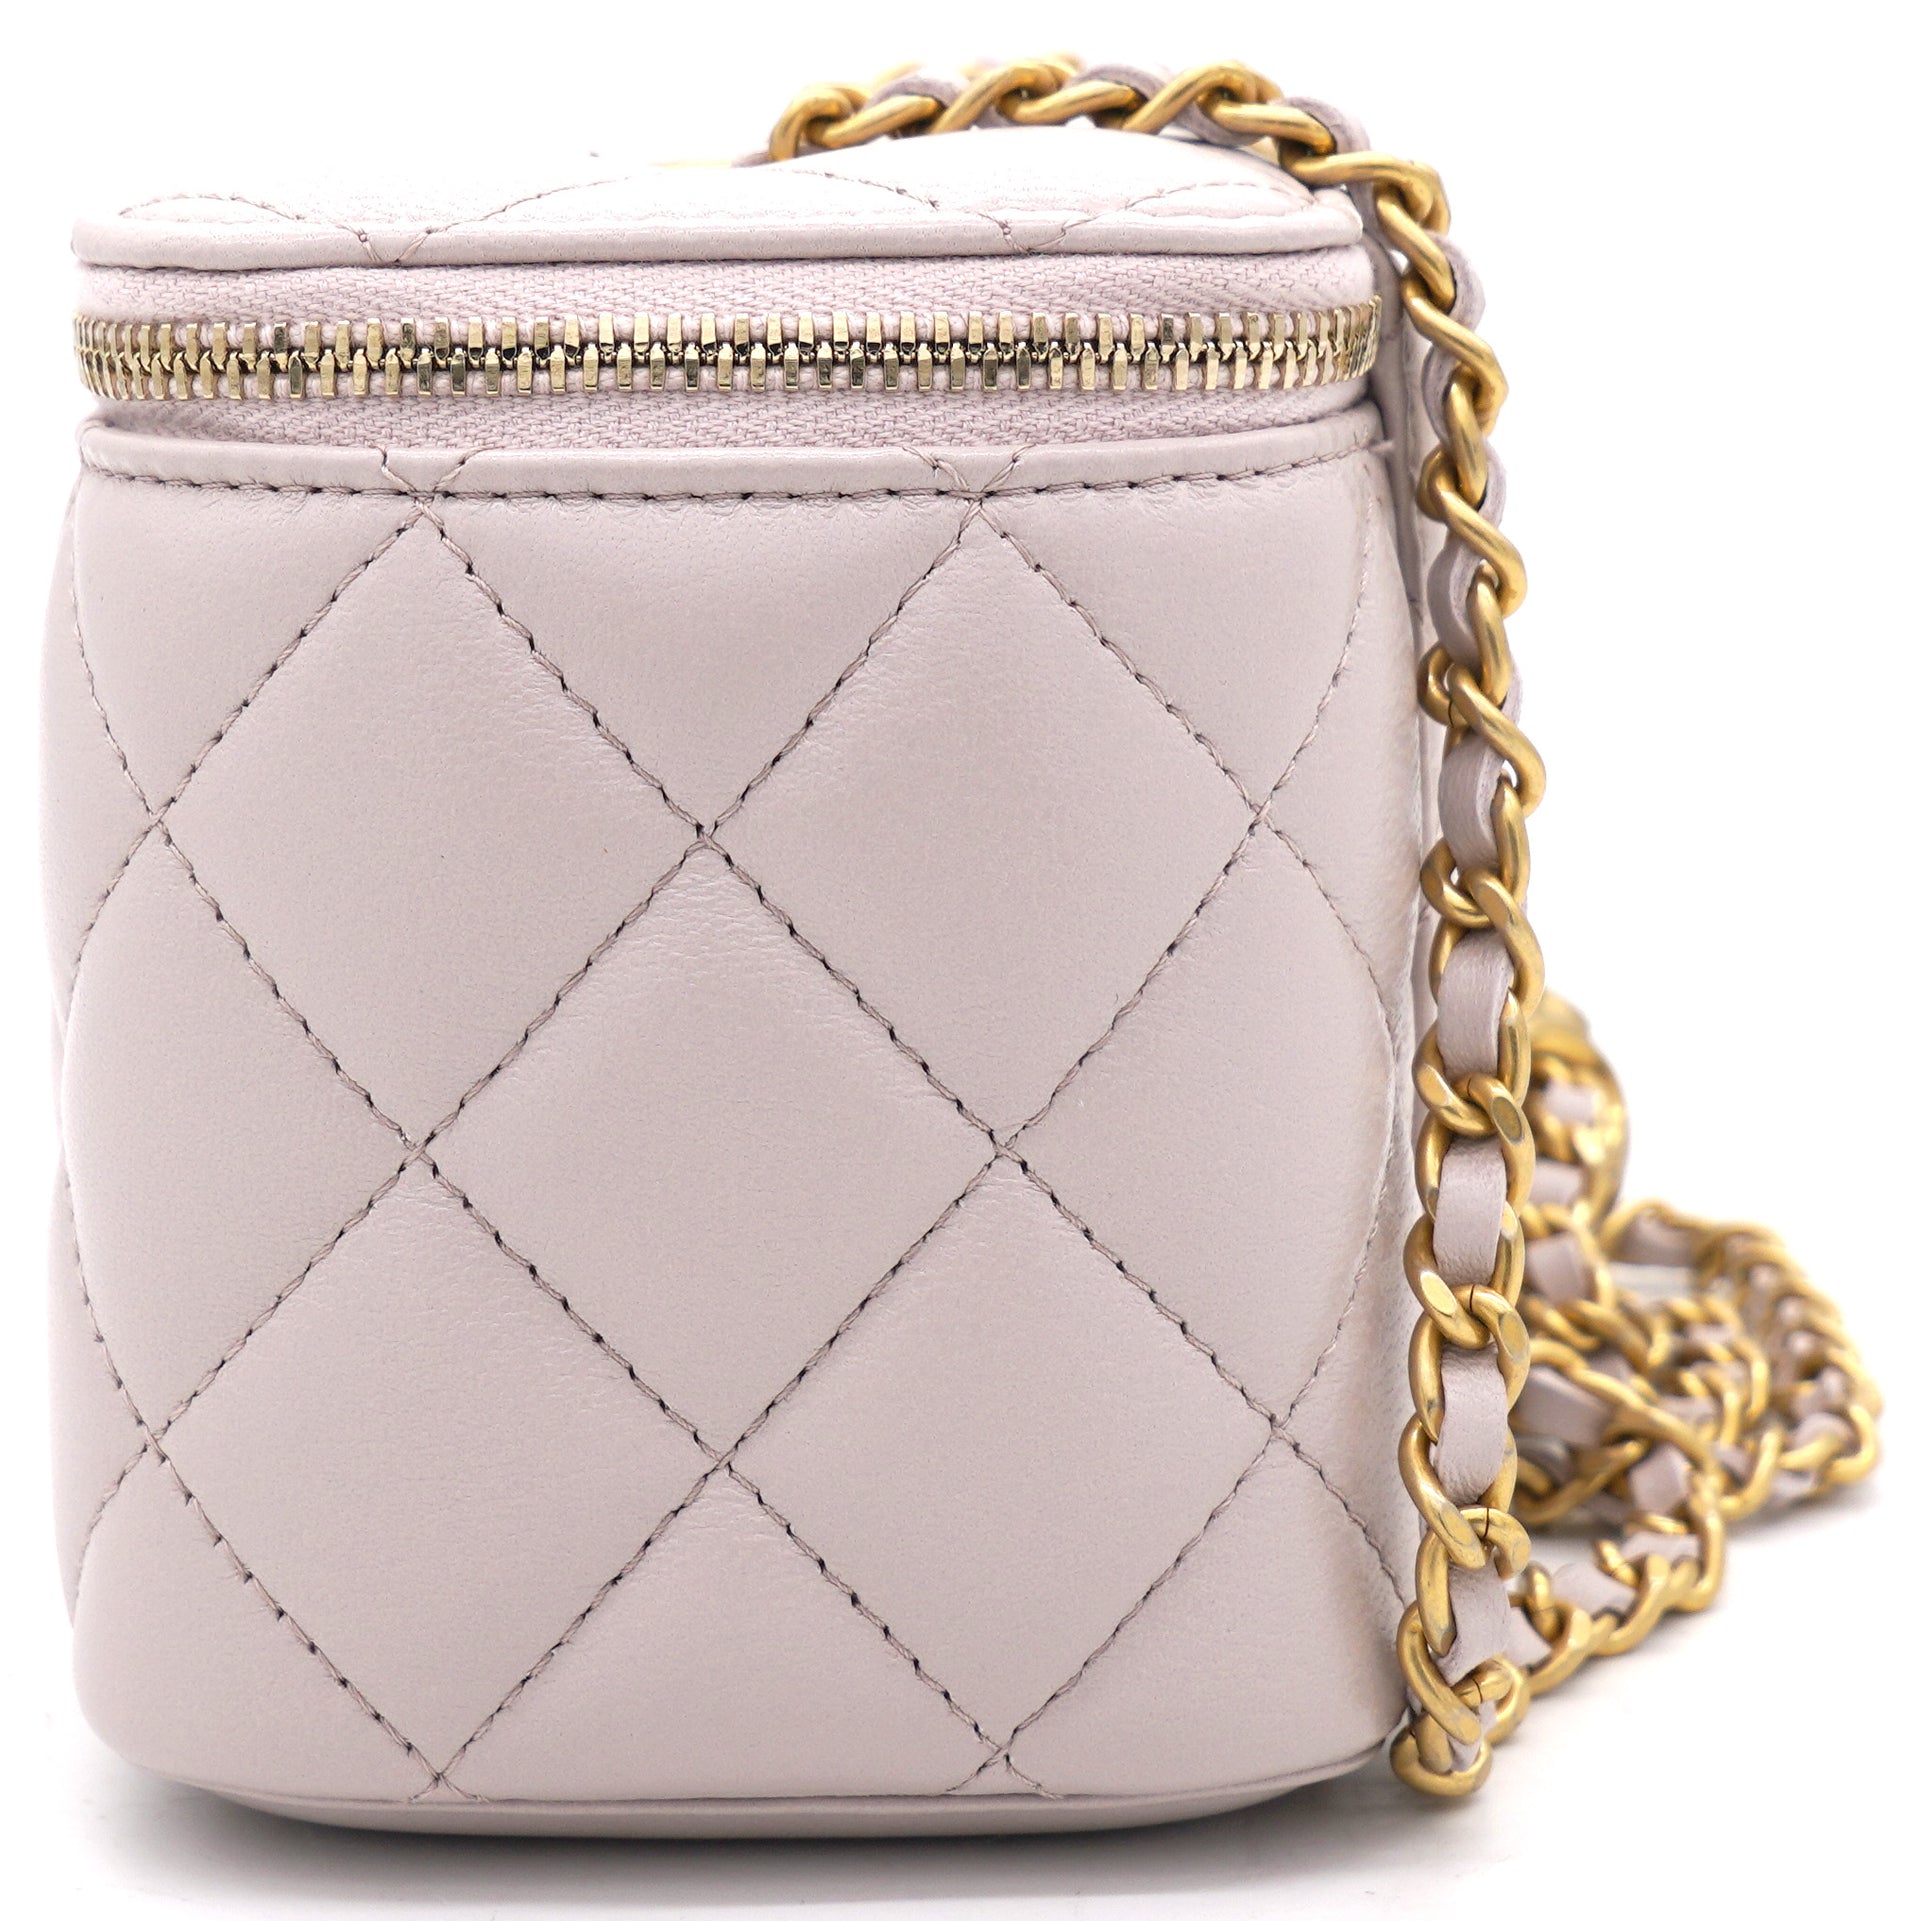 Chanel Baby Pink Quilted Caviar Vanity with Chain Pale Gold Hardware, 2021 (Very Good), Womens Handbag